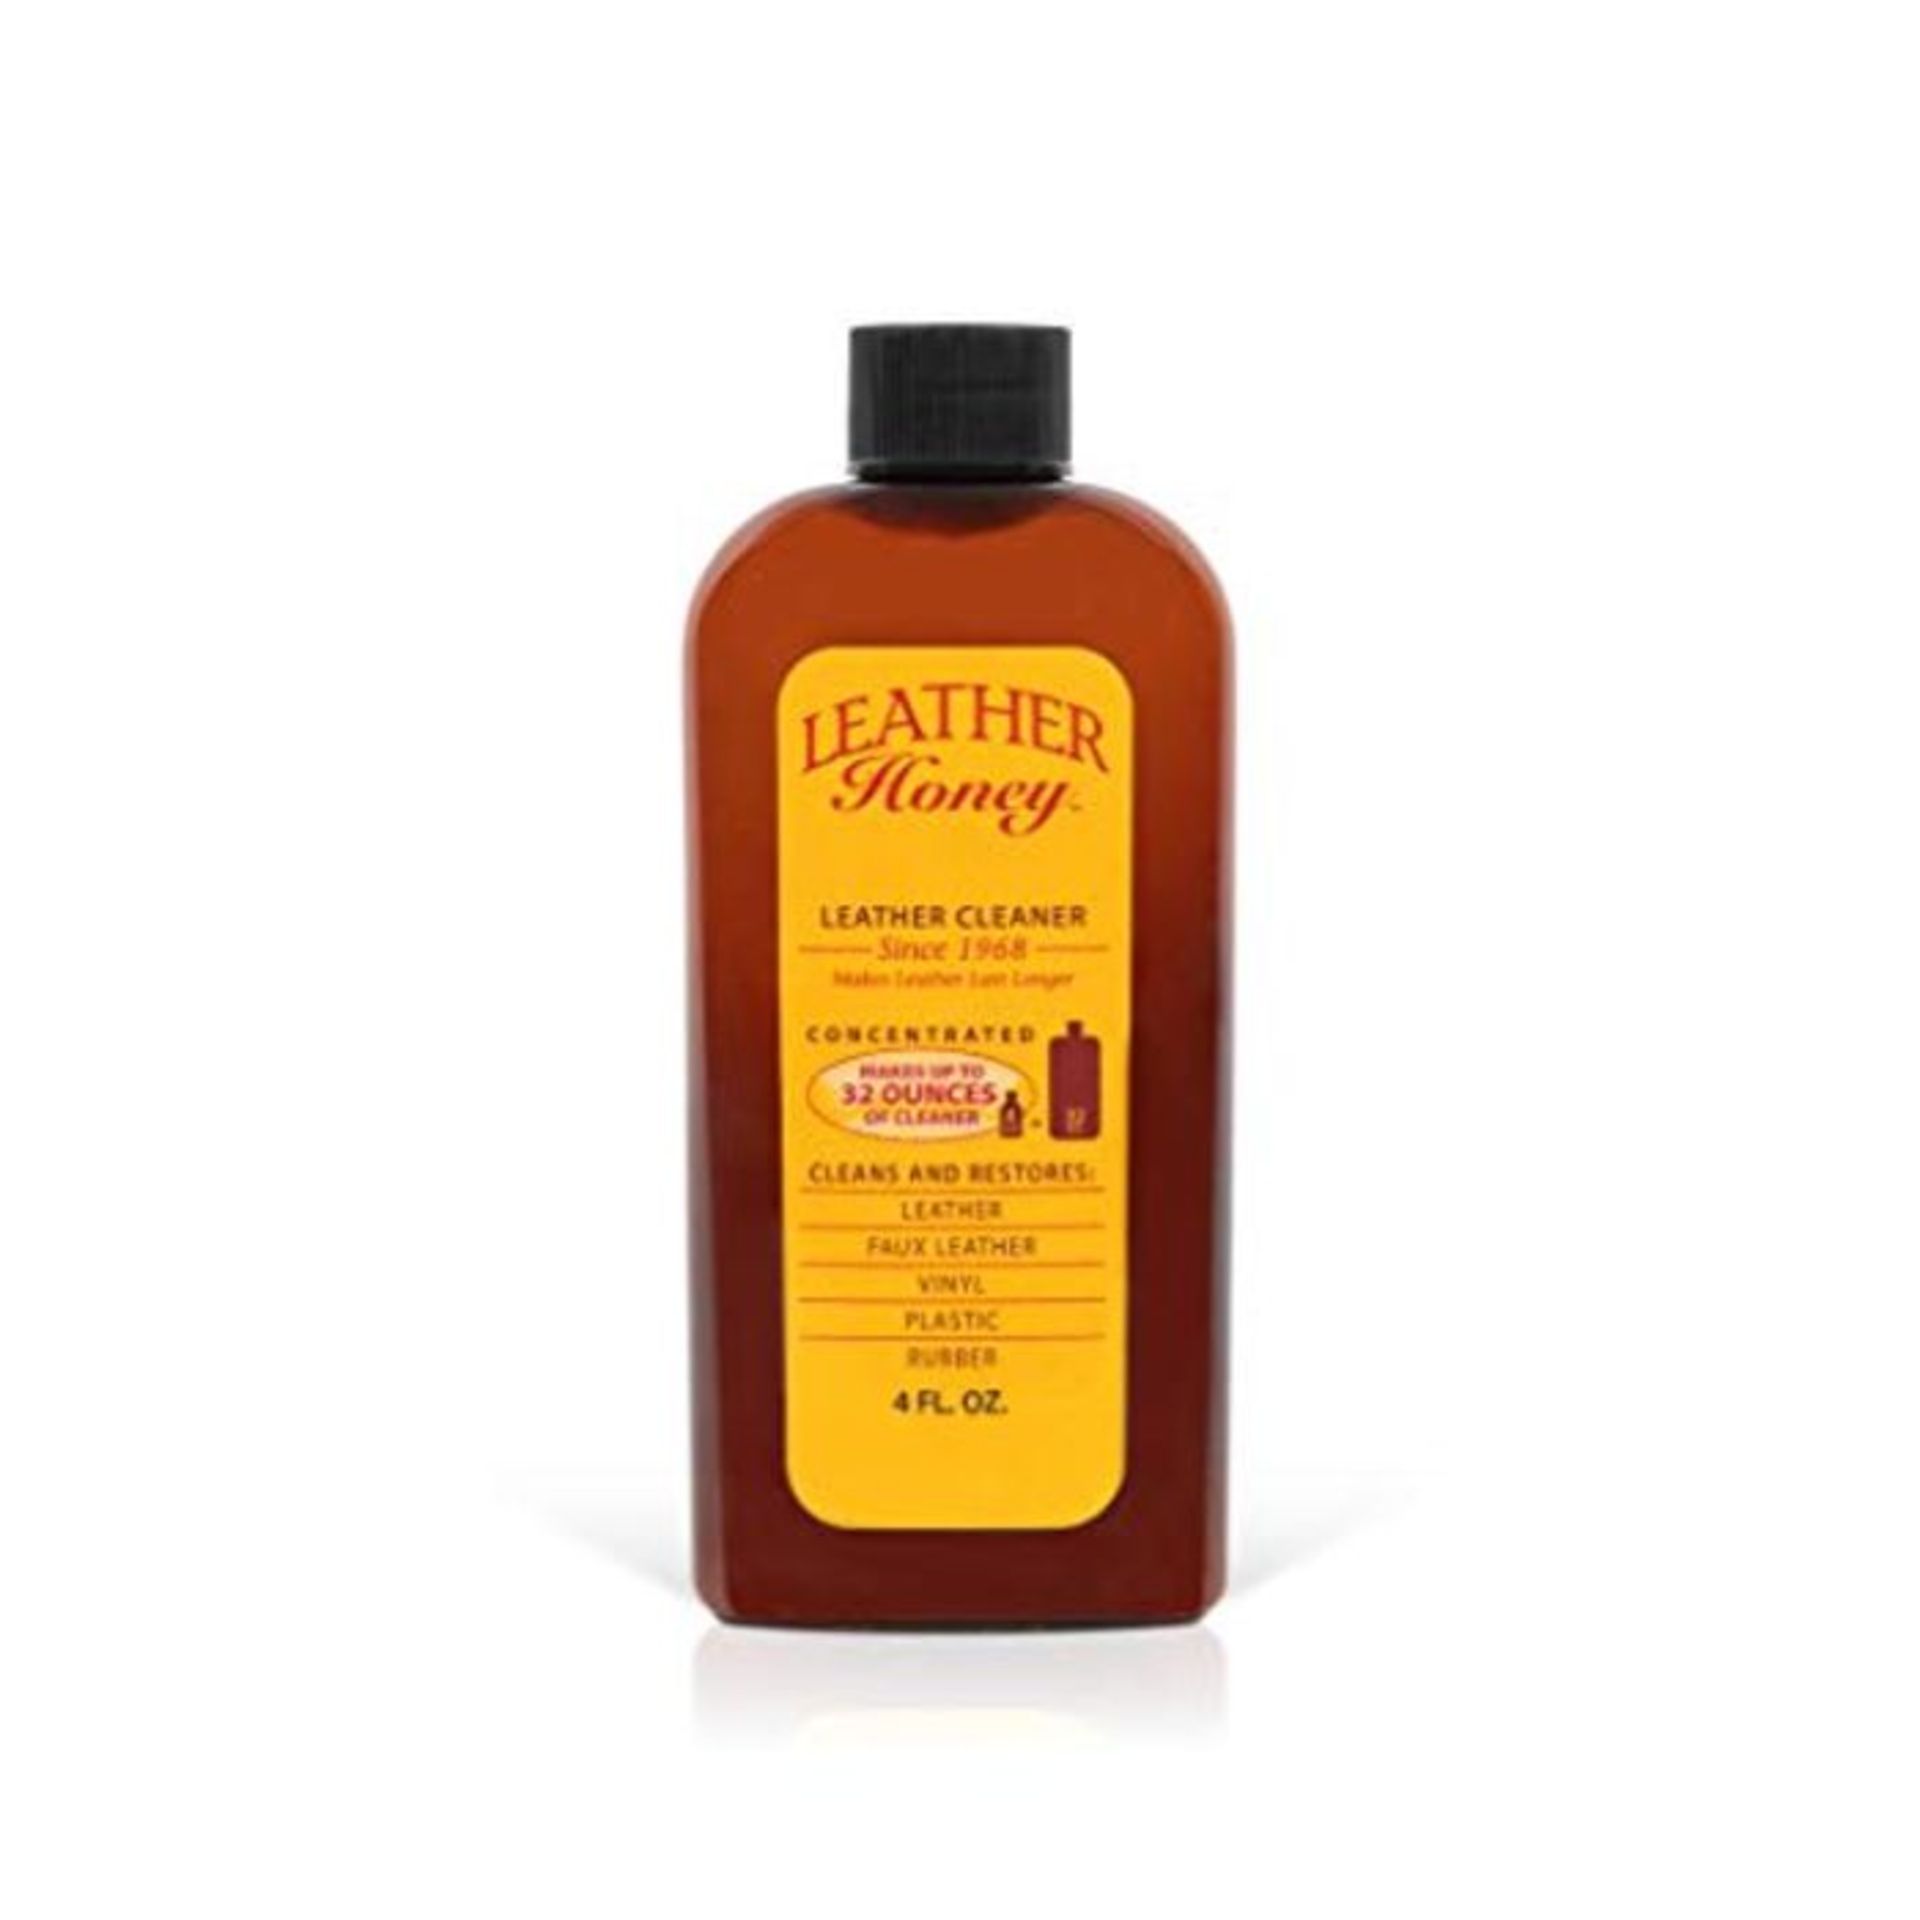 [CRACKED] Leather Cleaner by Leather Honey: The Best Leather Cleaner for Vinyl and Lea